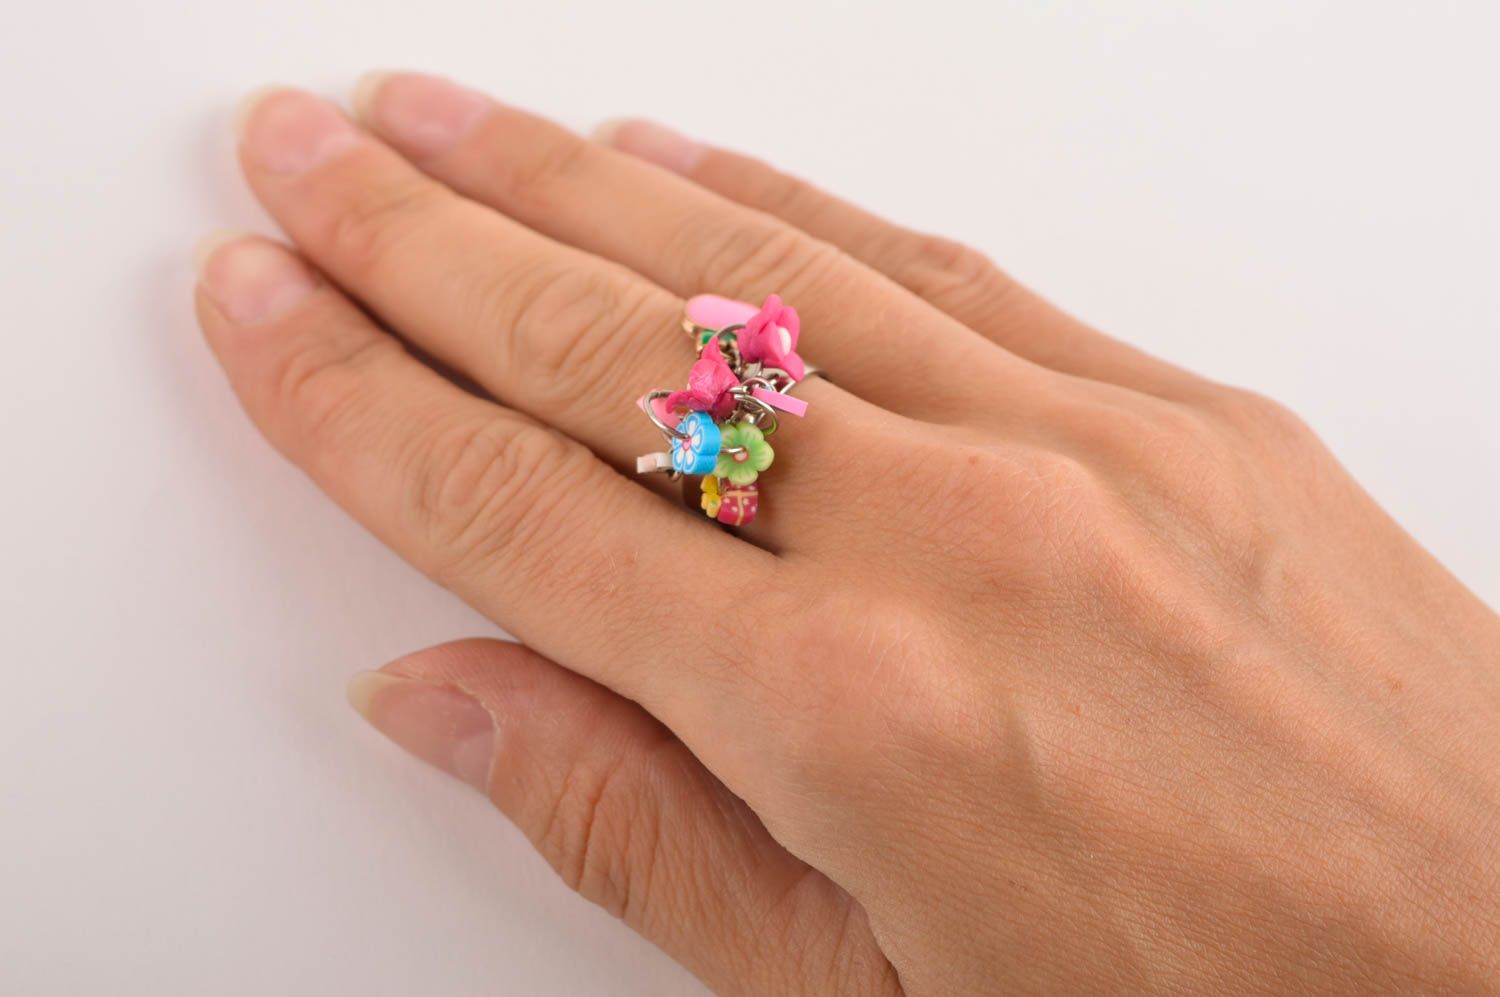 Handmade clay ring designer ring for women unusual accessory gift ideas photo 5